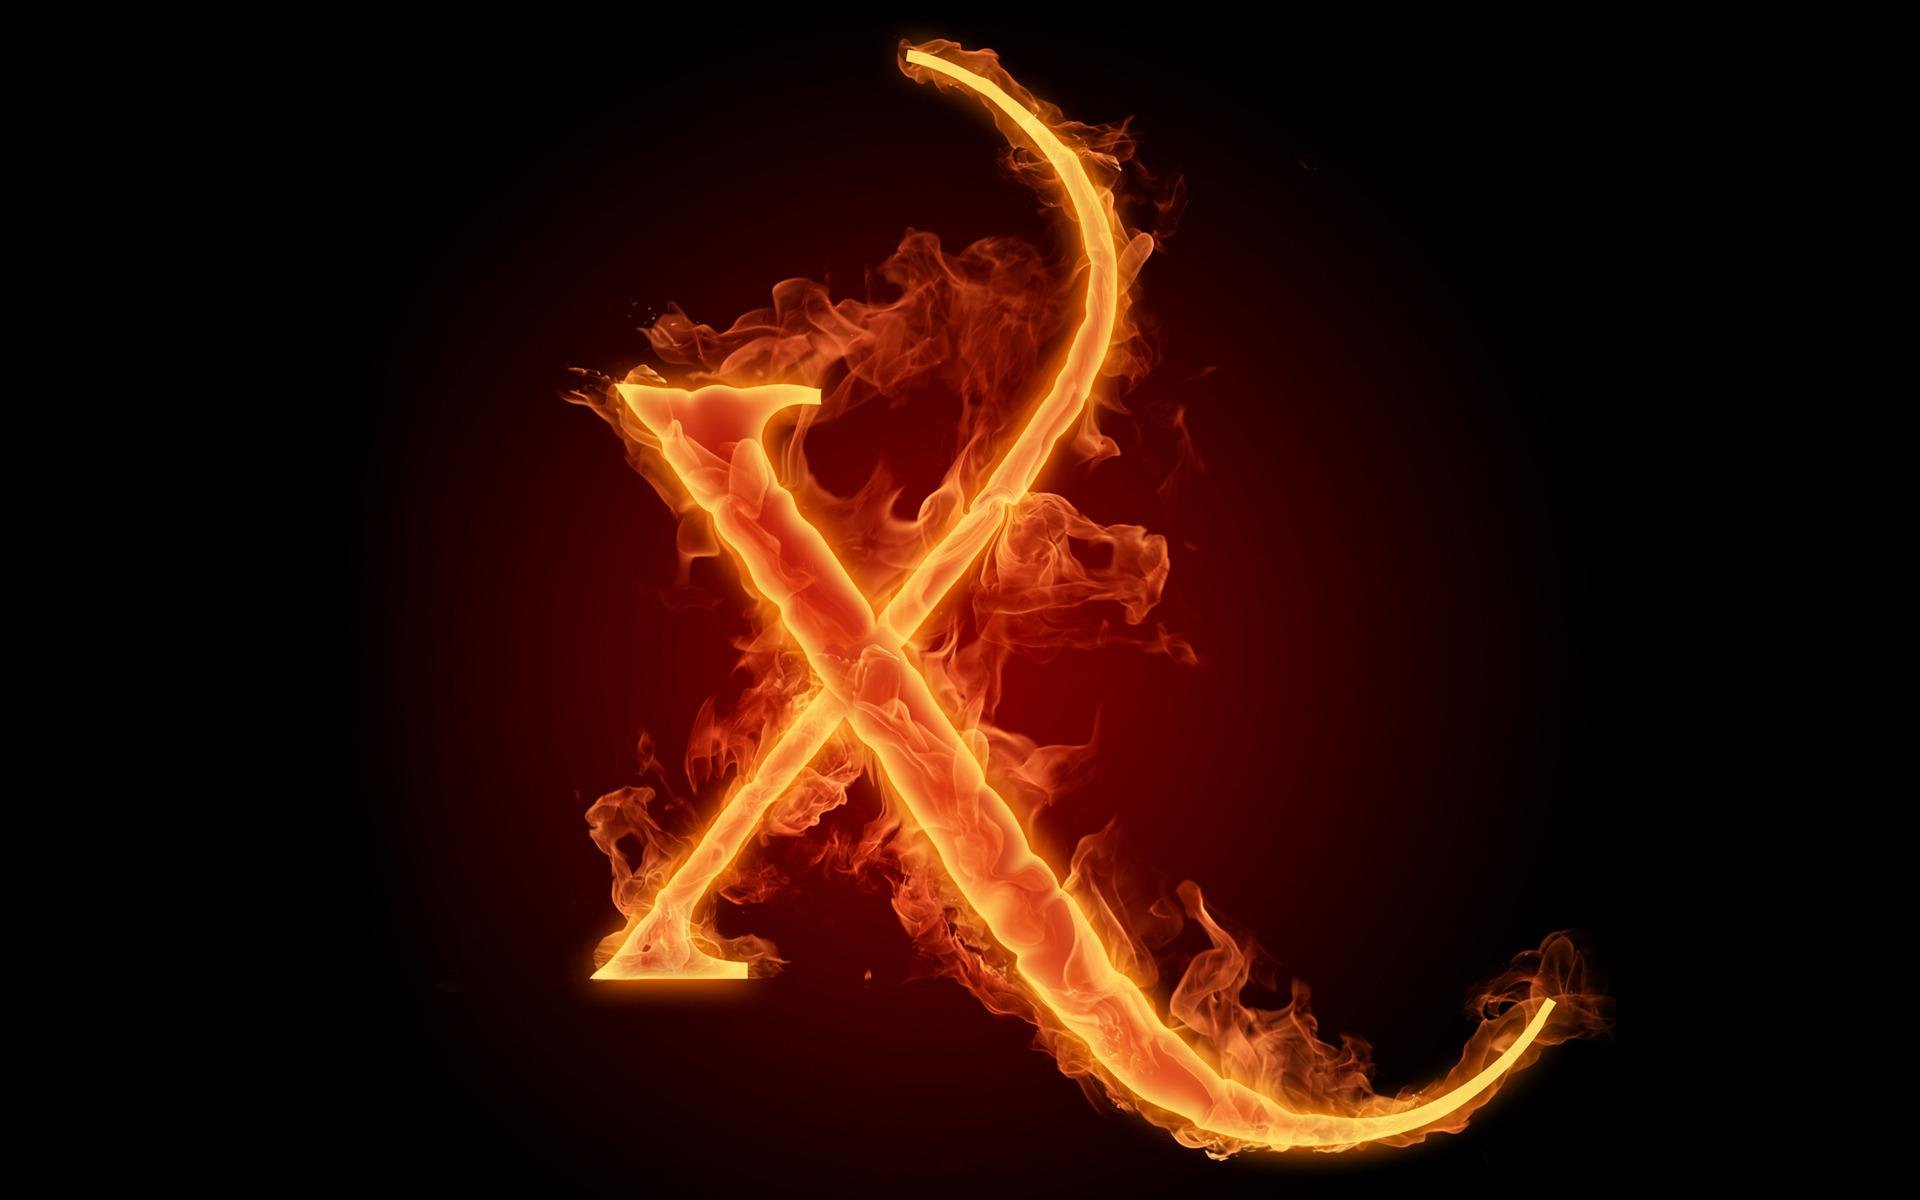 the fiery english alphabet picture x, 1920x1200 Wallpaper